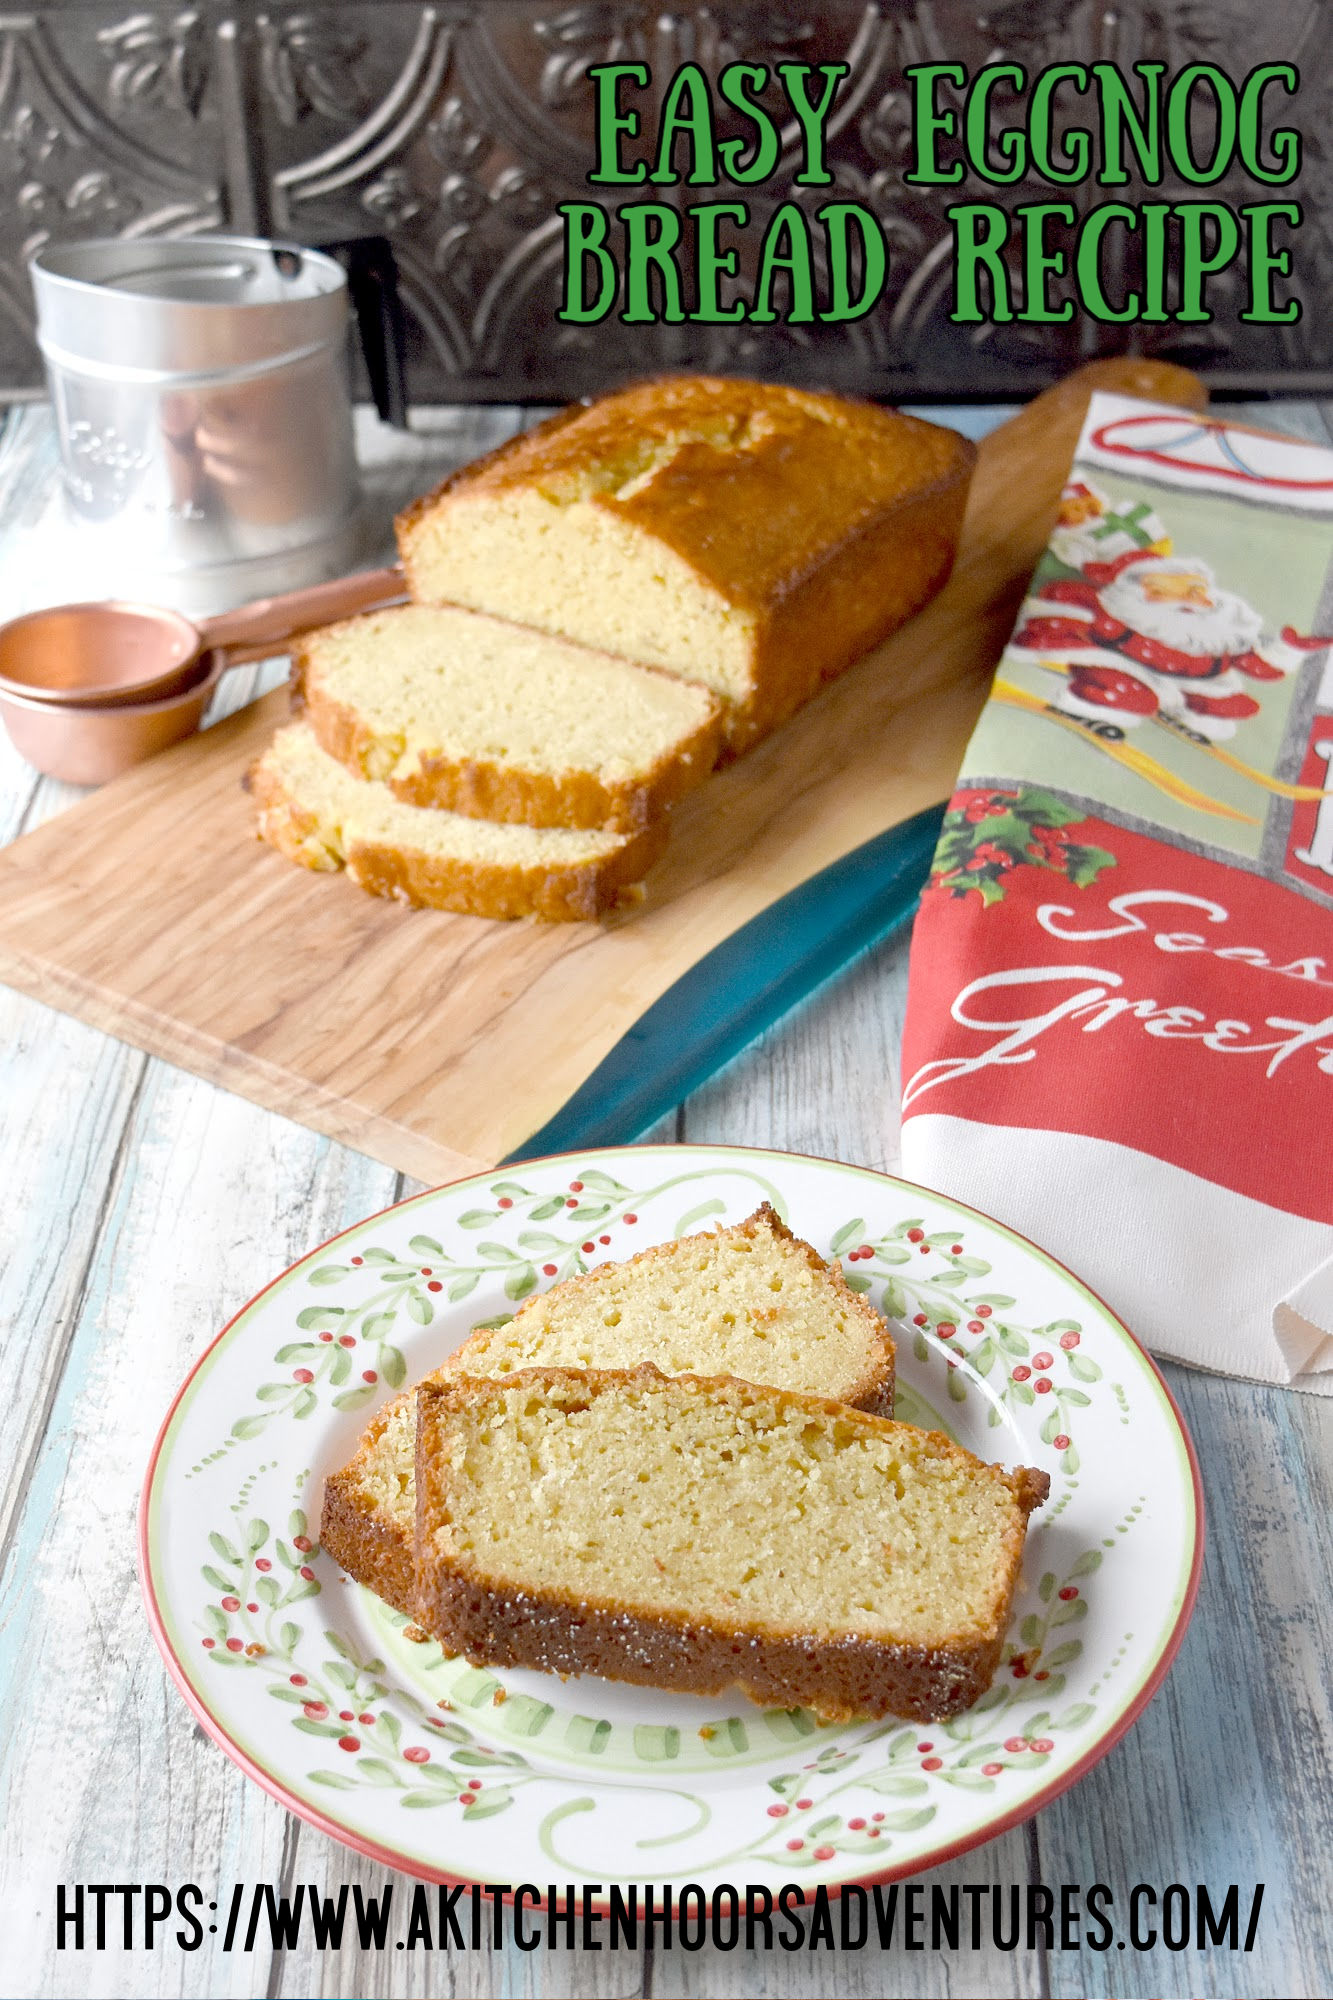 This Easy Eggnog Bread Recipe whips up in just a few minutes. It’s something you can throw together before everyone gets up then bake it while everyone trickles down to the kitchen. #ChristmasSweetsWeek #eggnog #quickbread #easyeggnogbread